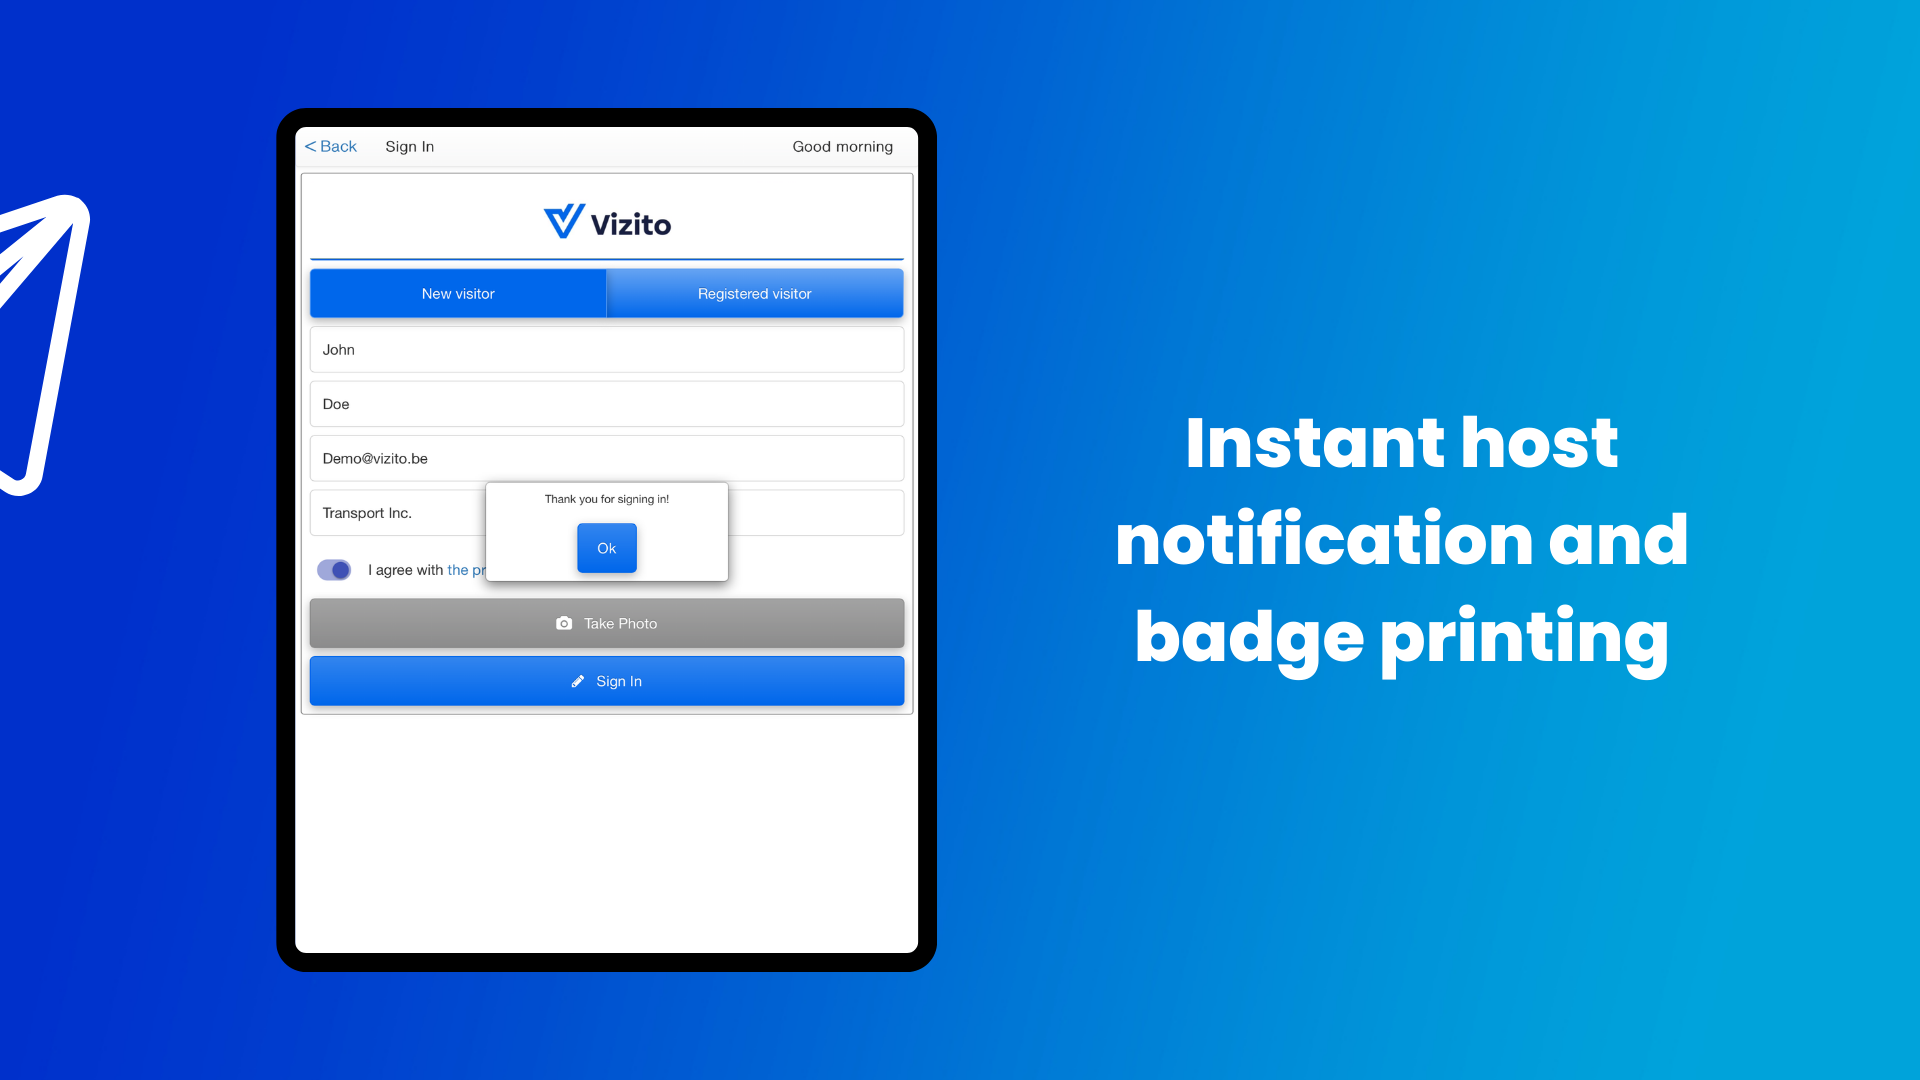 When you visitor arrives, your host is automatically notified and optionally a badge will automatically be printed.